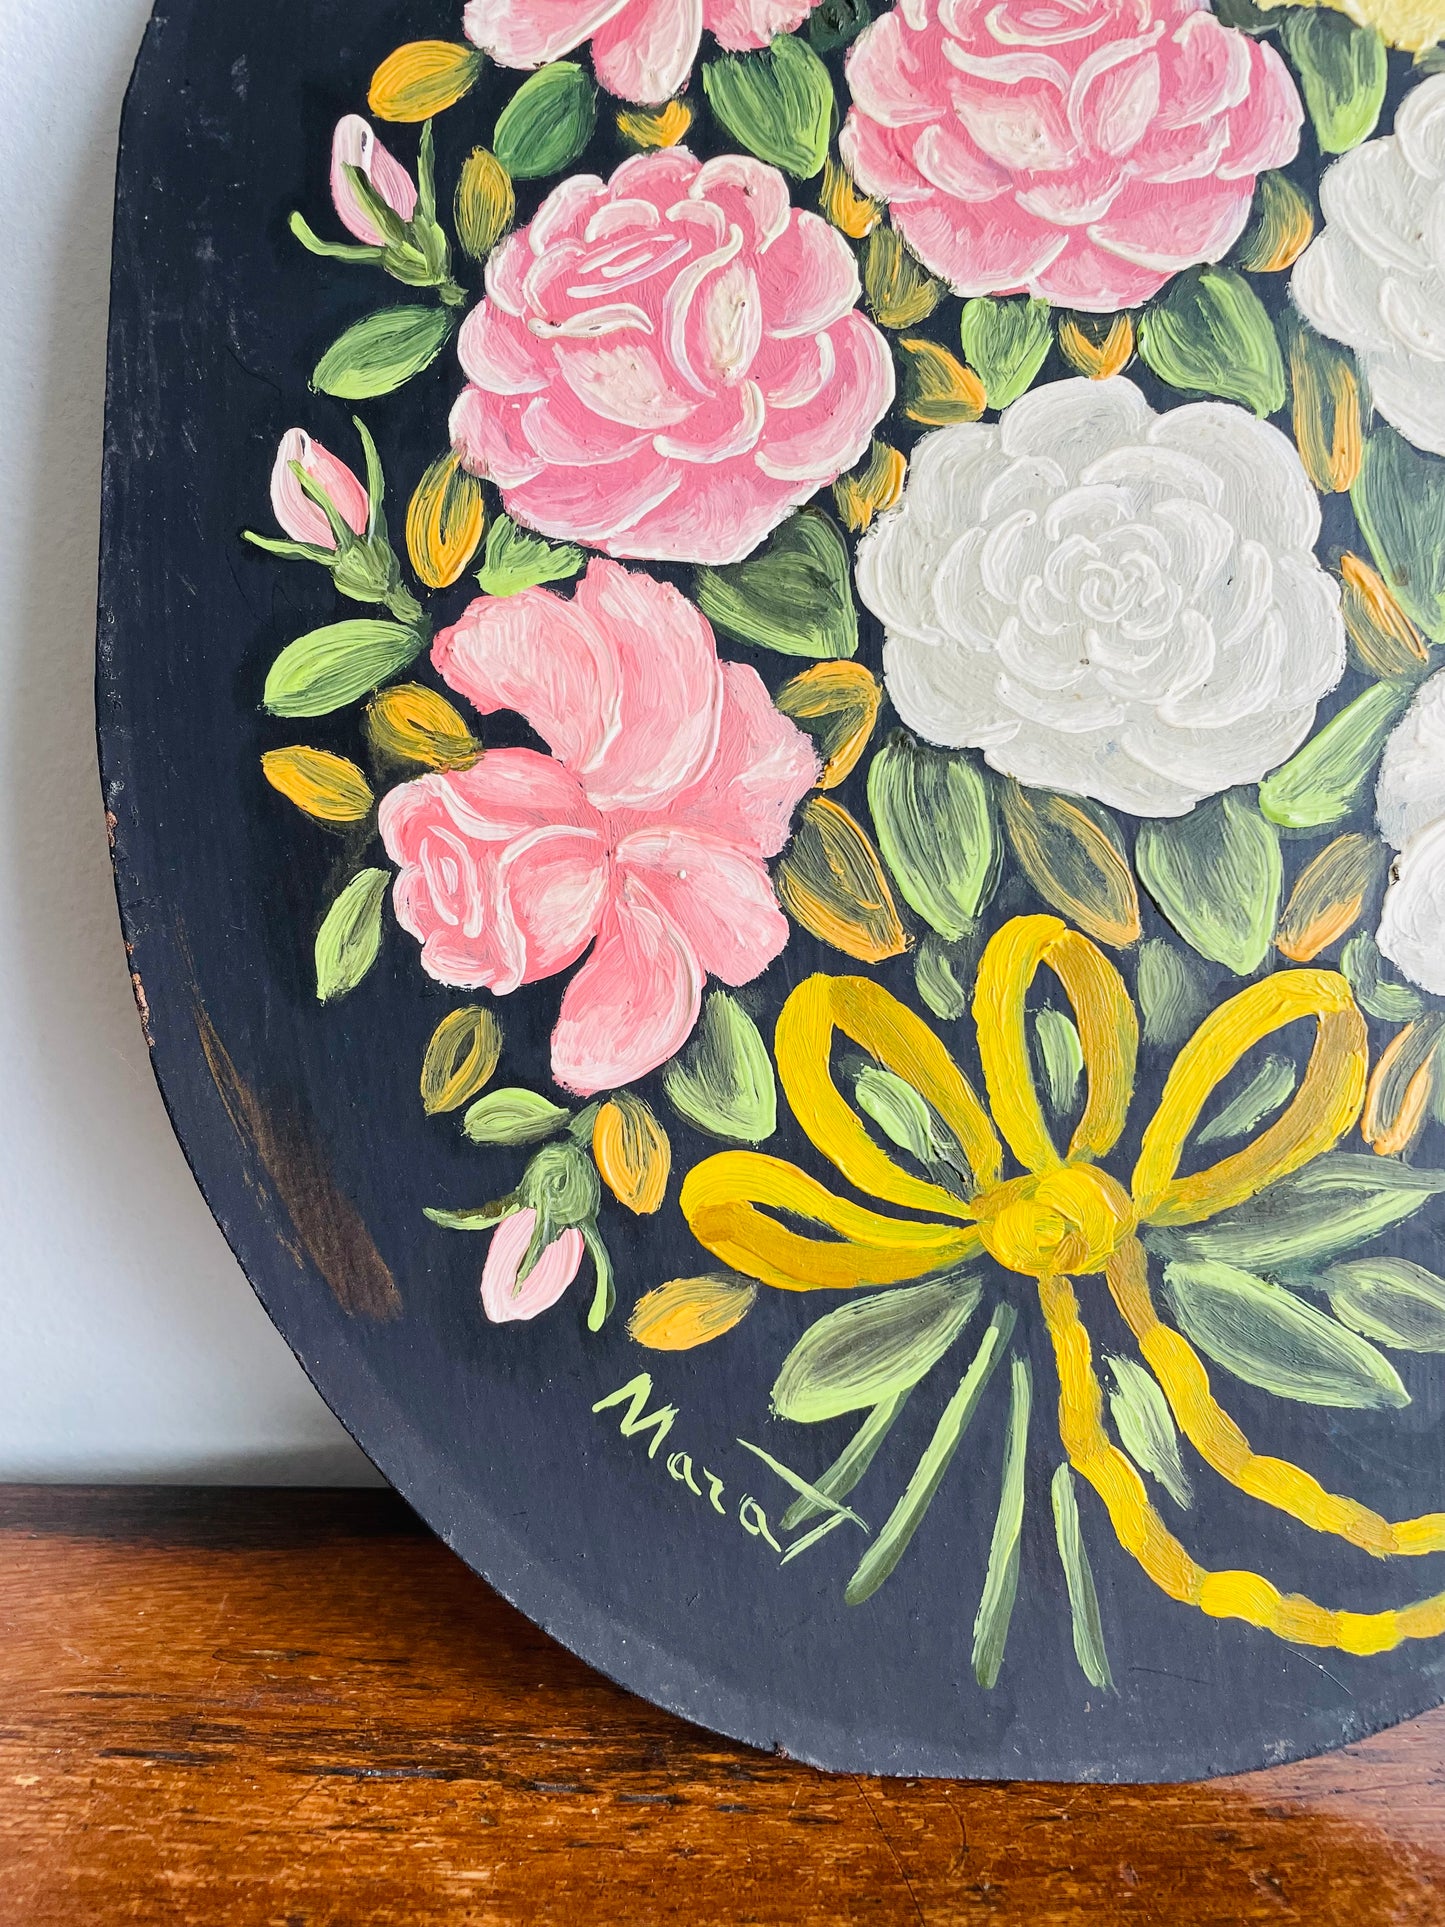 Original Art Oval Painting of Flower Bouquet - Signed by Artist - Found in Lisbon, Portugal